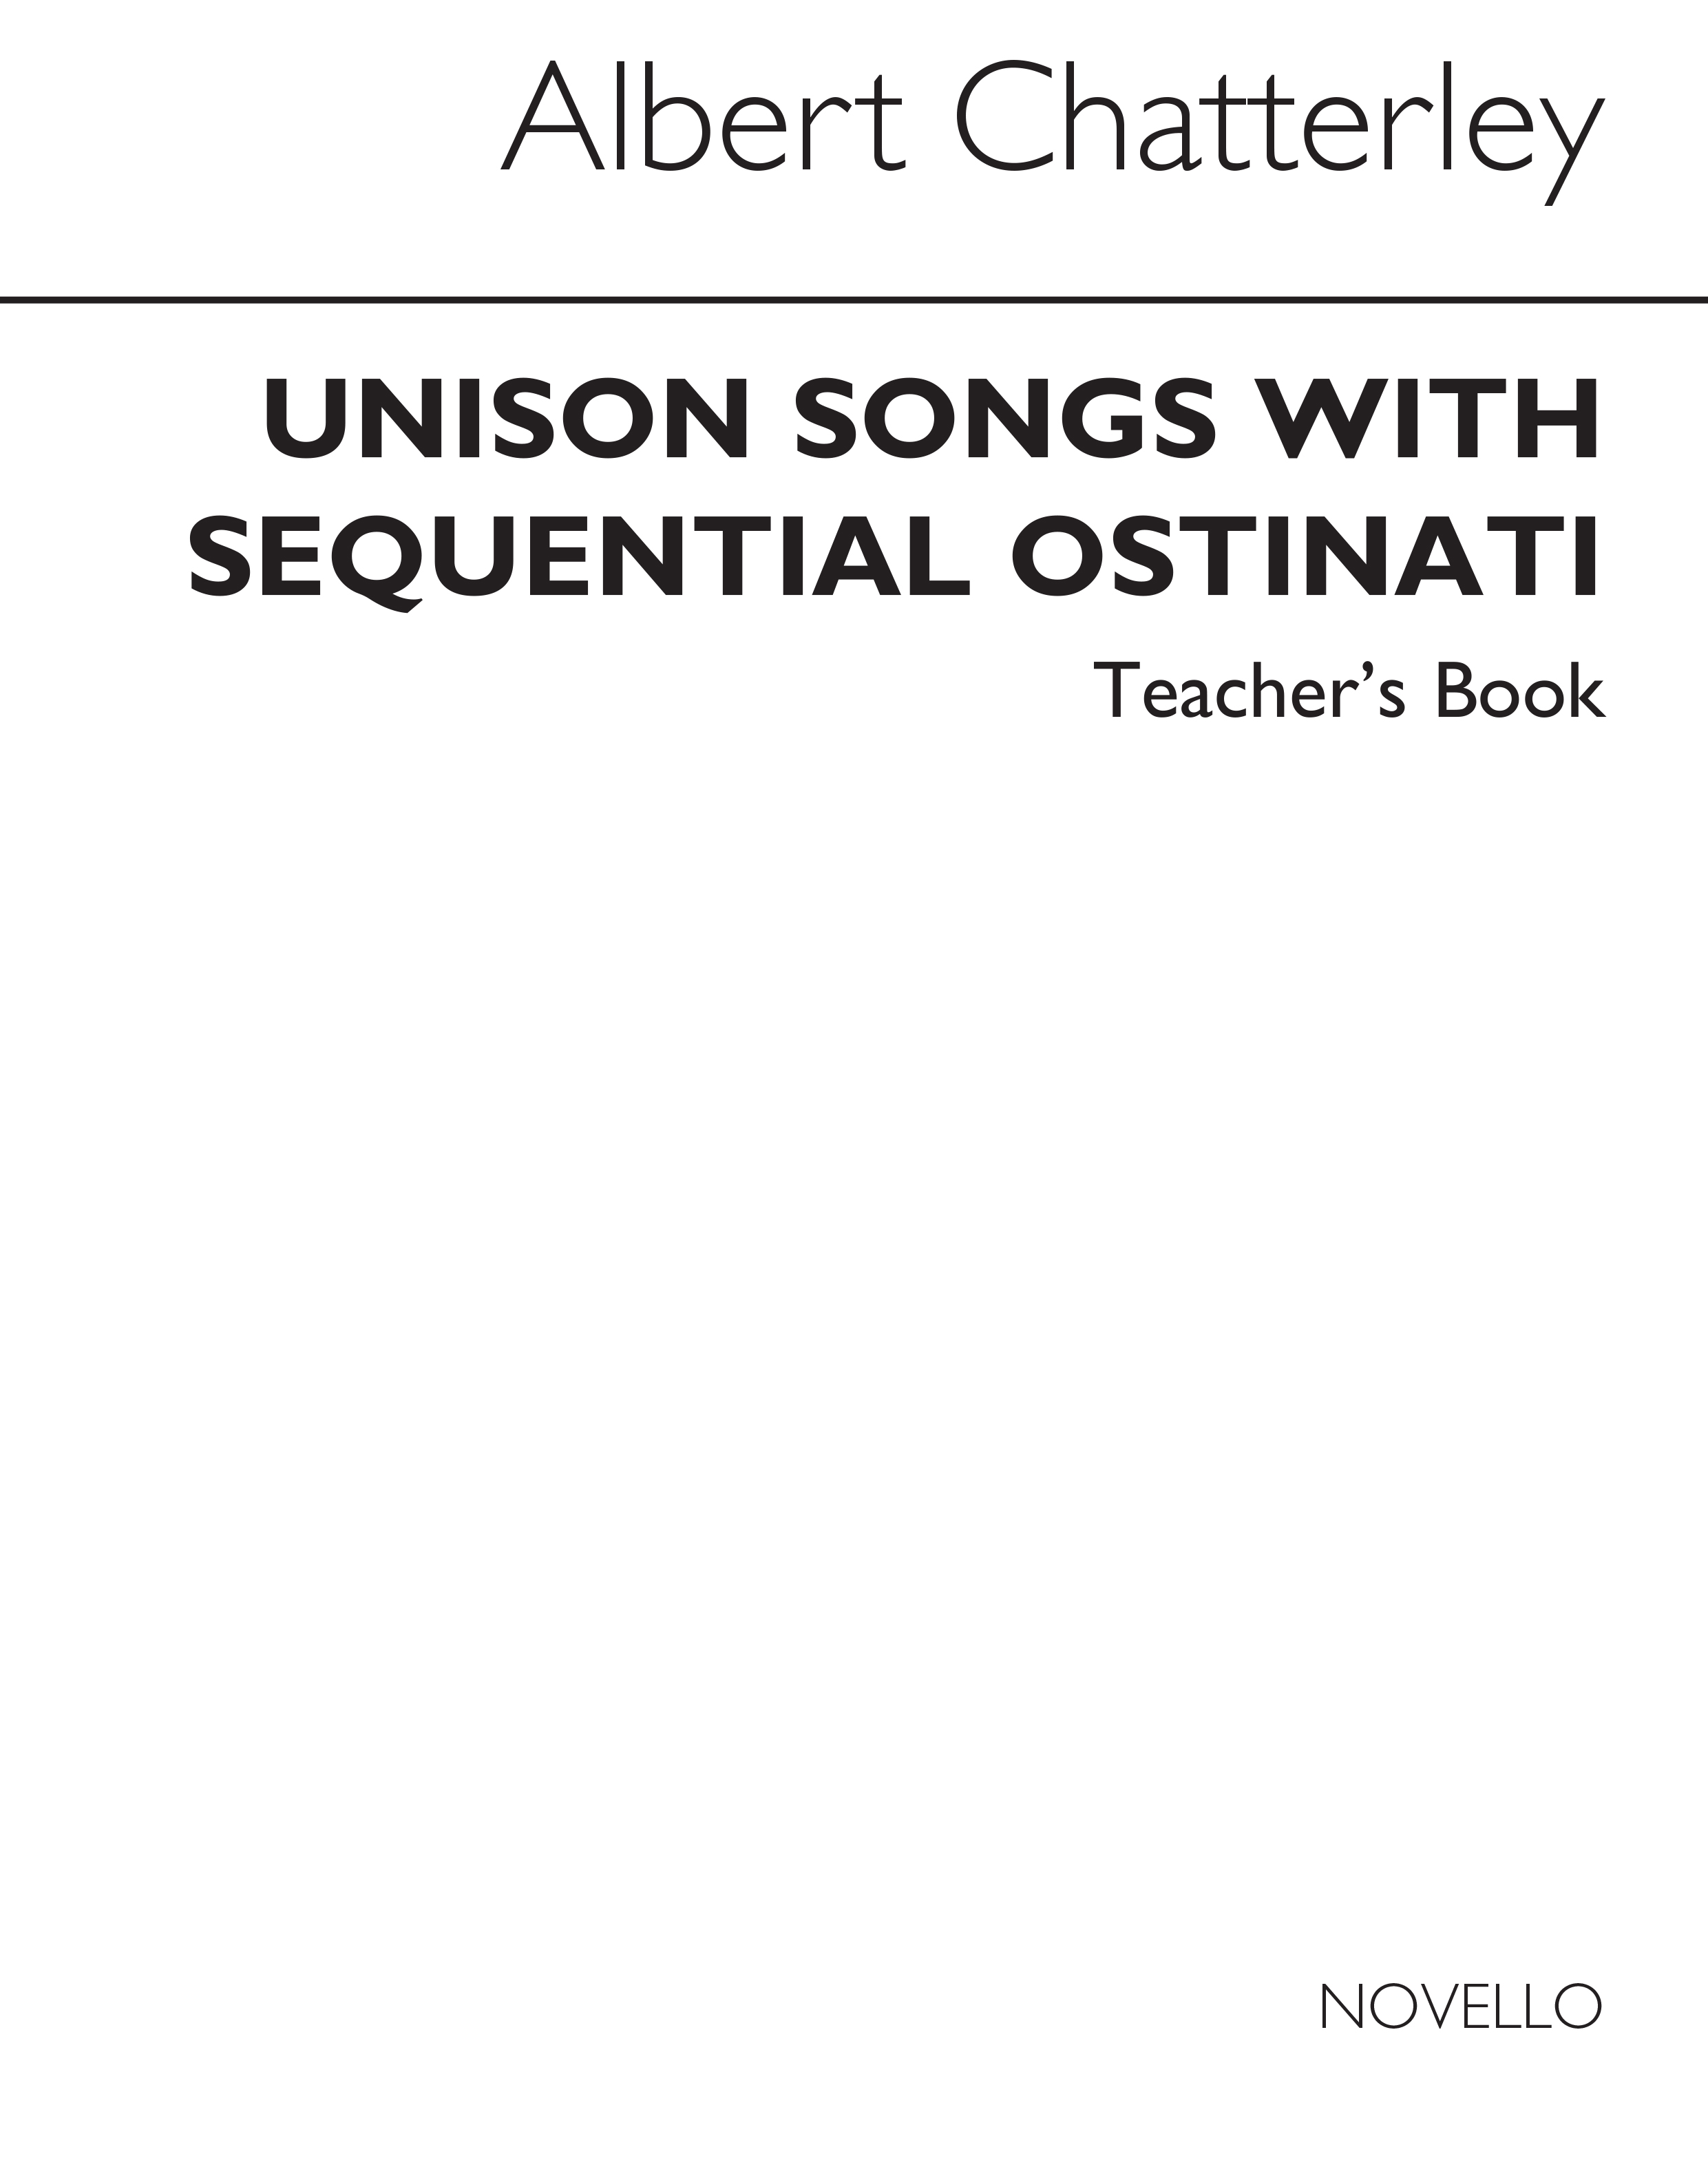 Chatterley: Unison Songs With Sequential Ostinati (Teacher's Book)